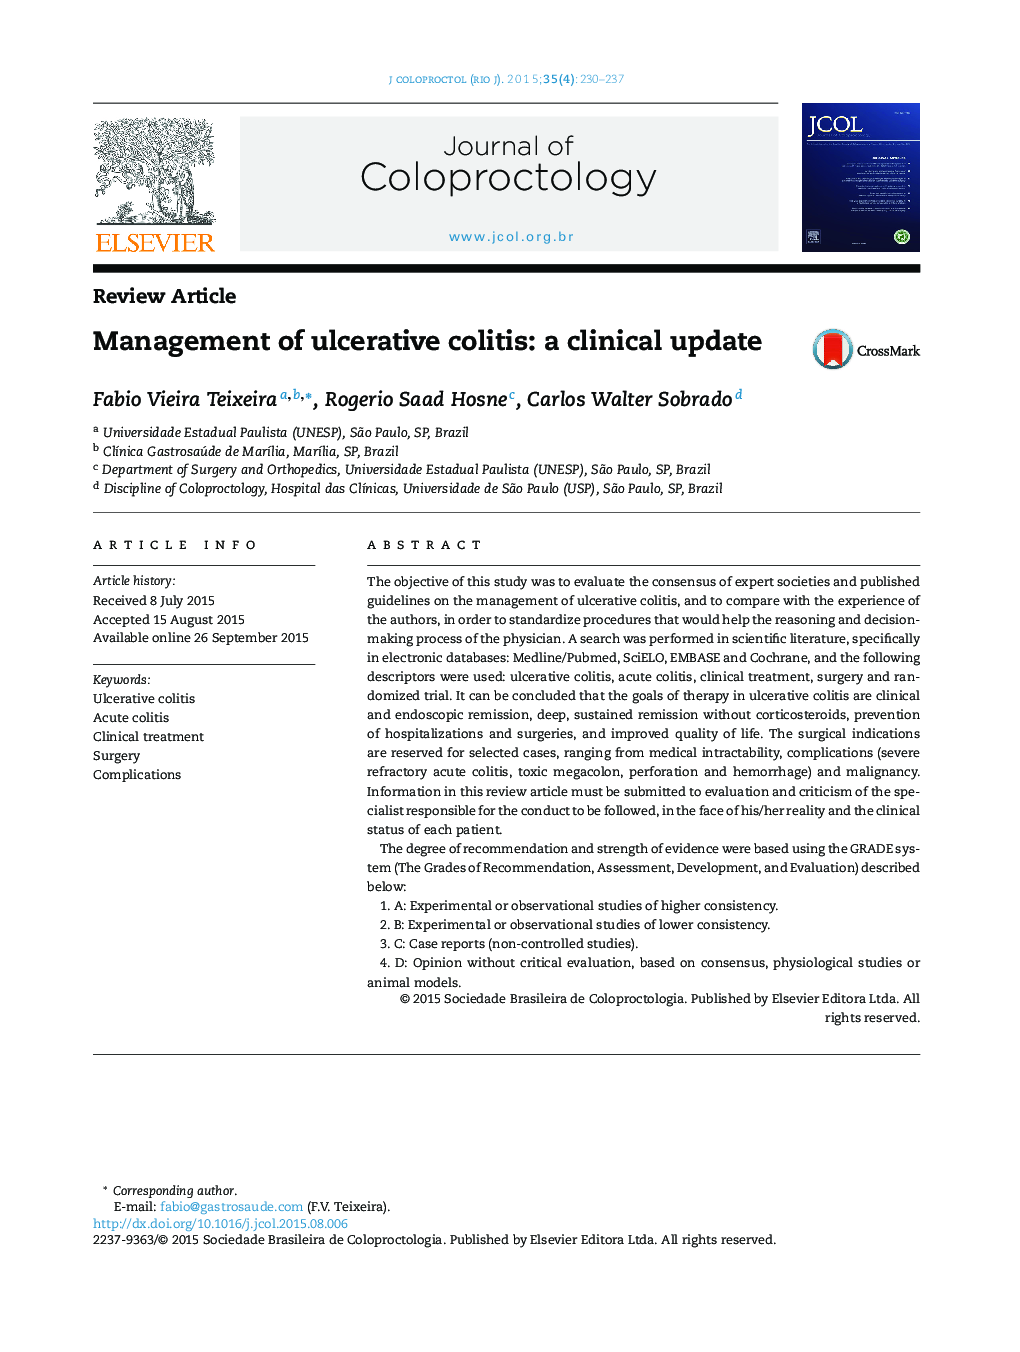 Management of ulcerative colitis: a clinical update